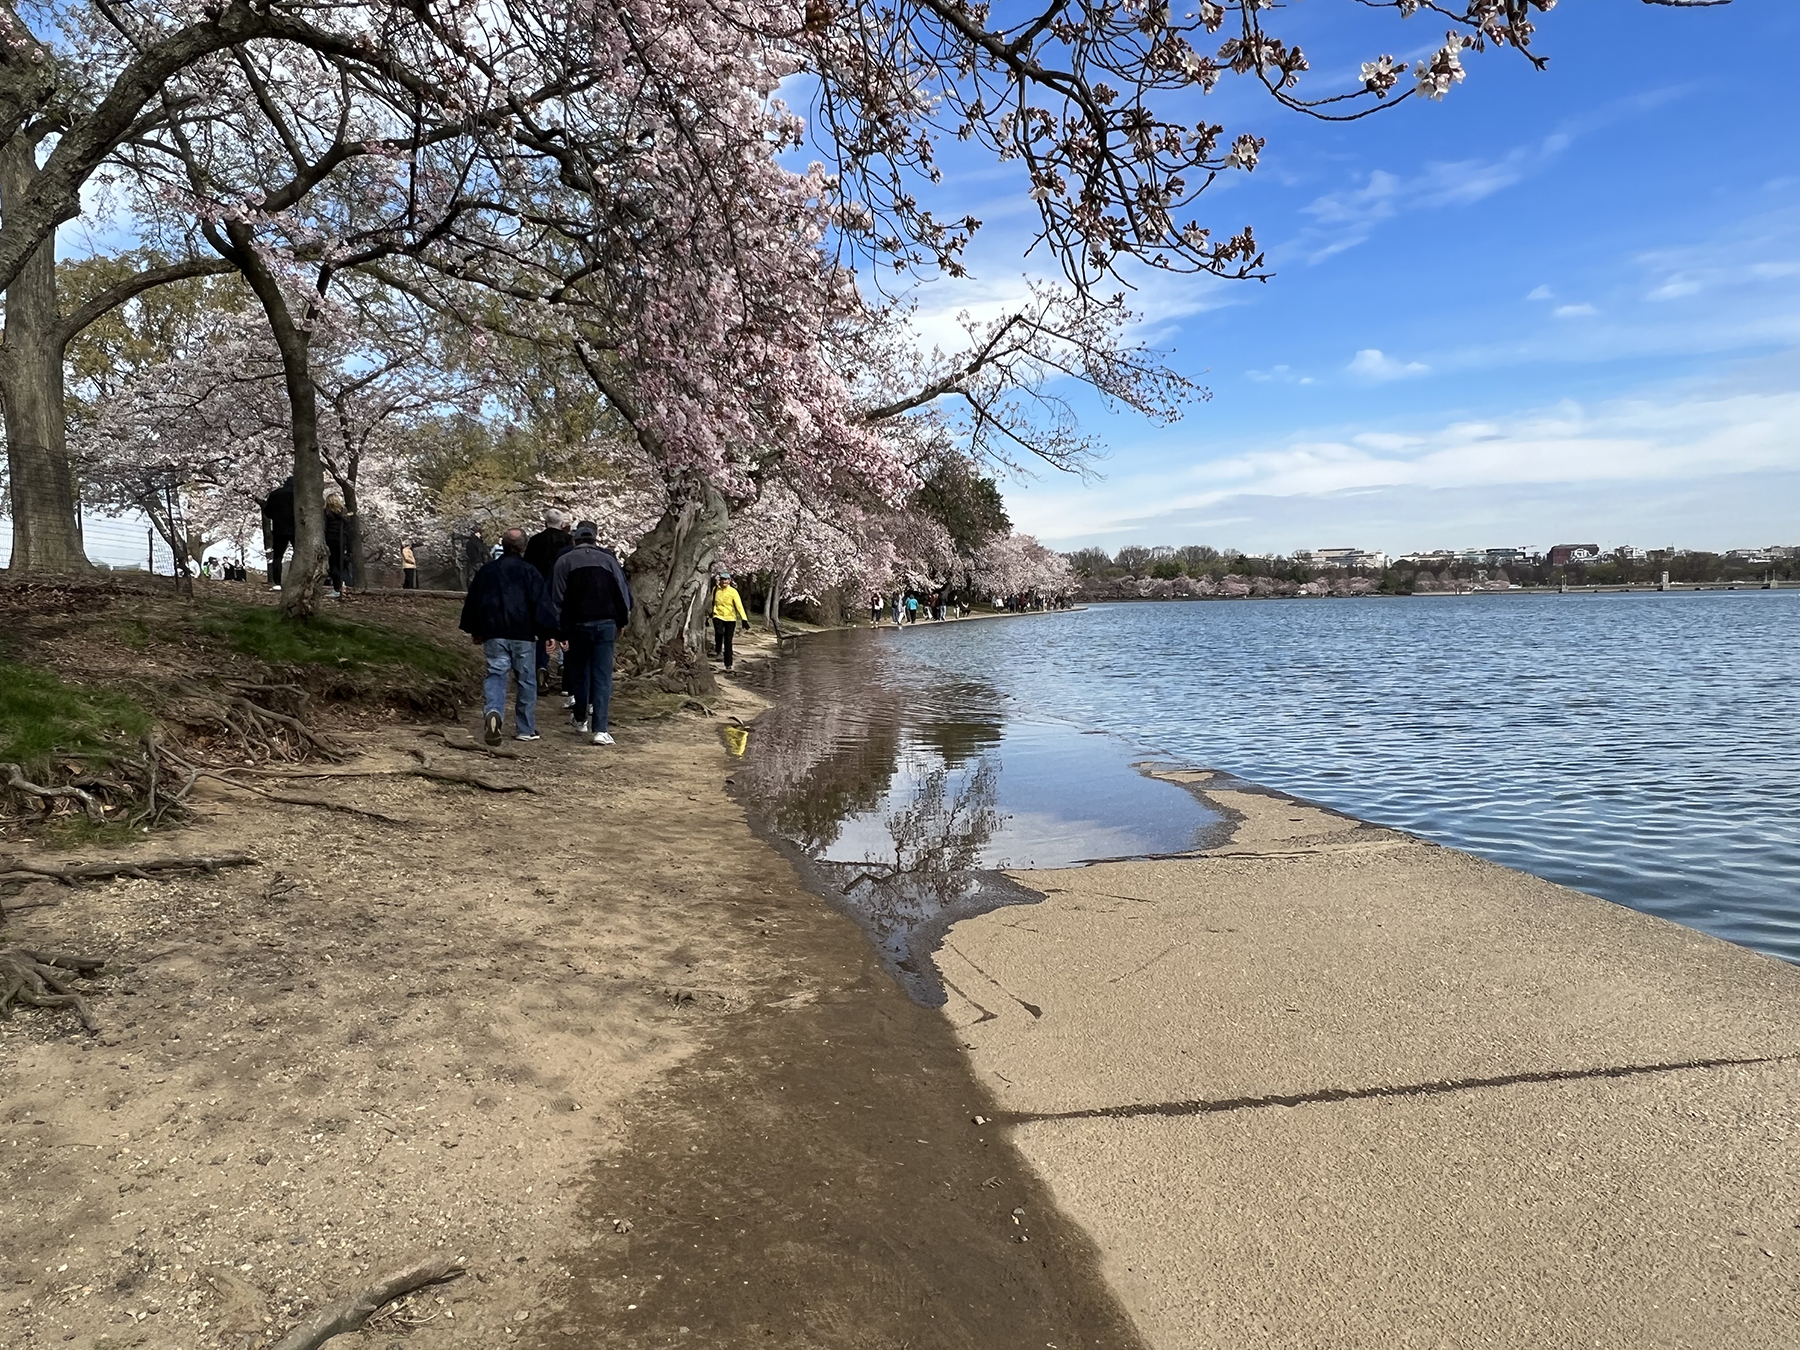 people walk a shoreline with cherry blossoms overhead